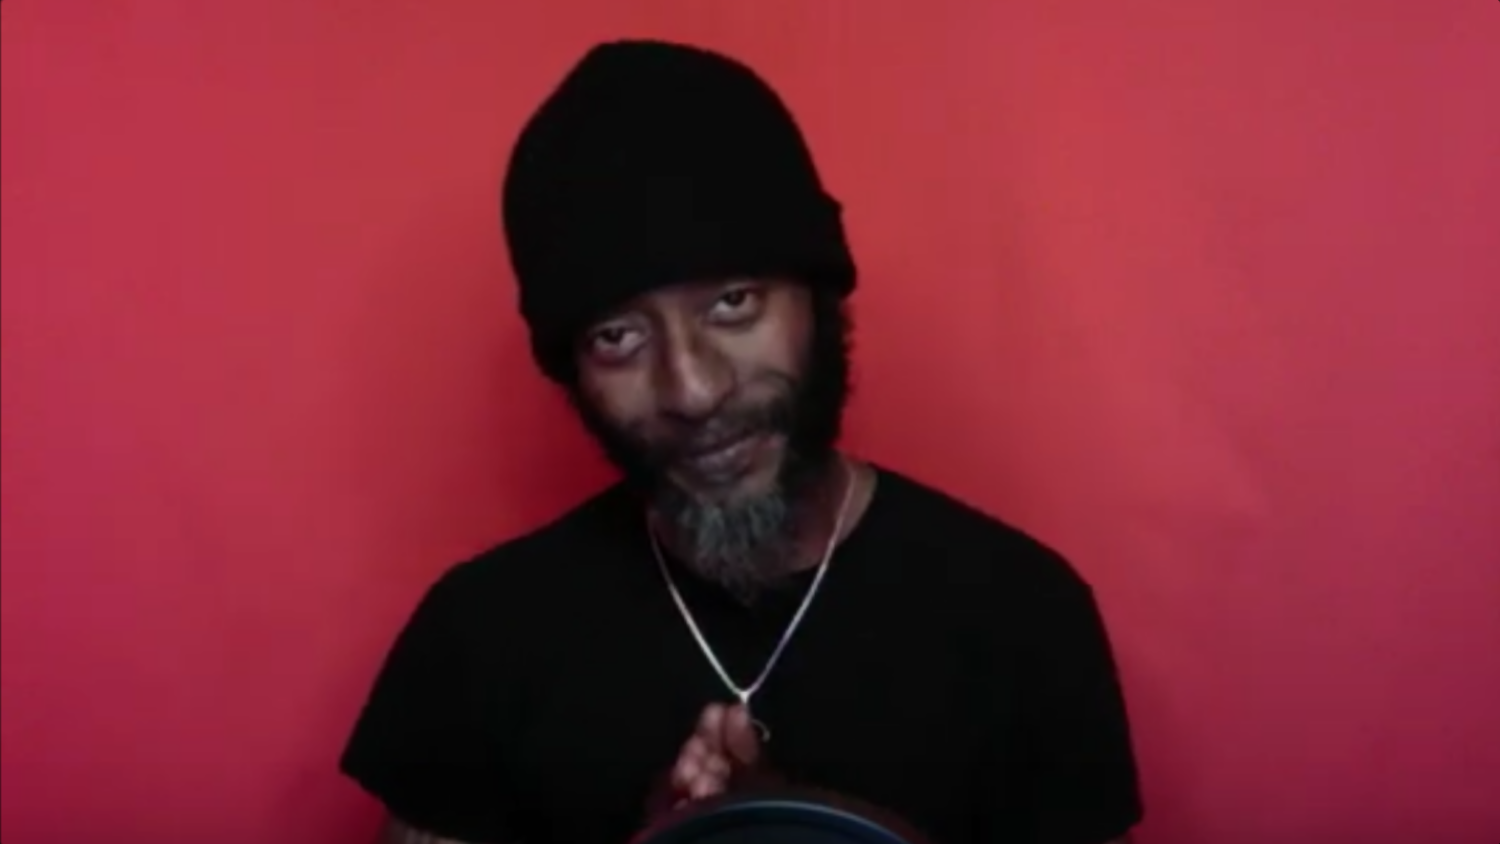 Wakefield Brewster, with his hands together and dressed in black (including a beanie) and a thin gold chain, standing in front of a red background